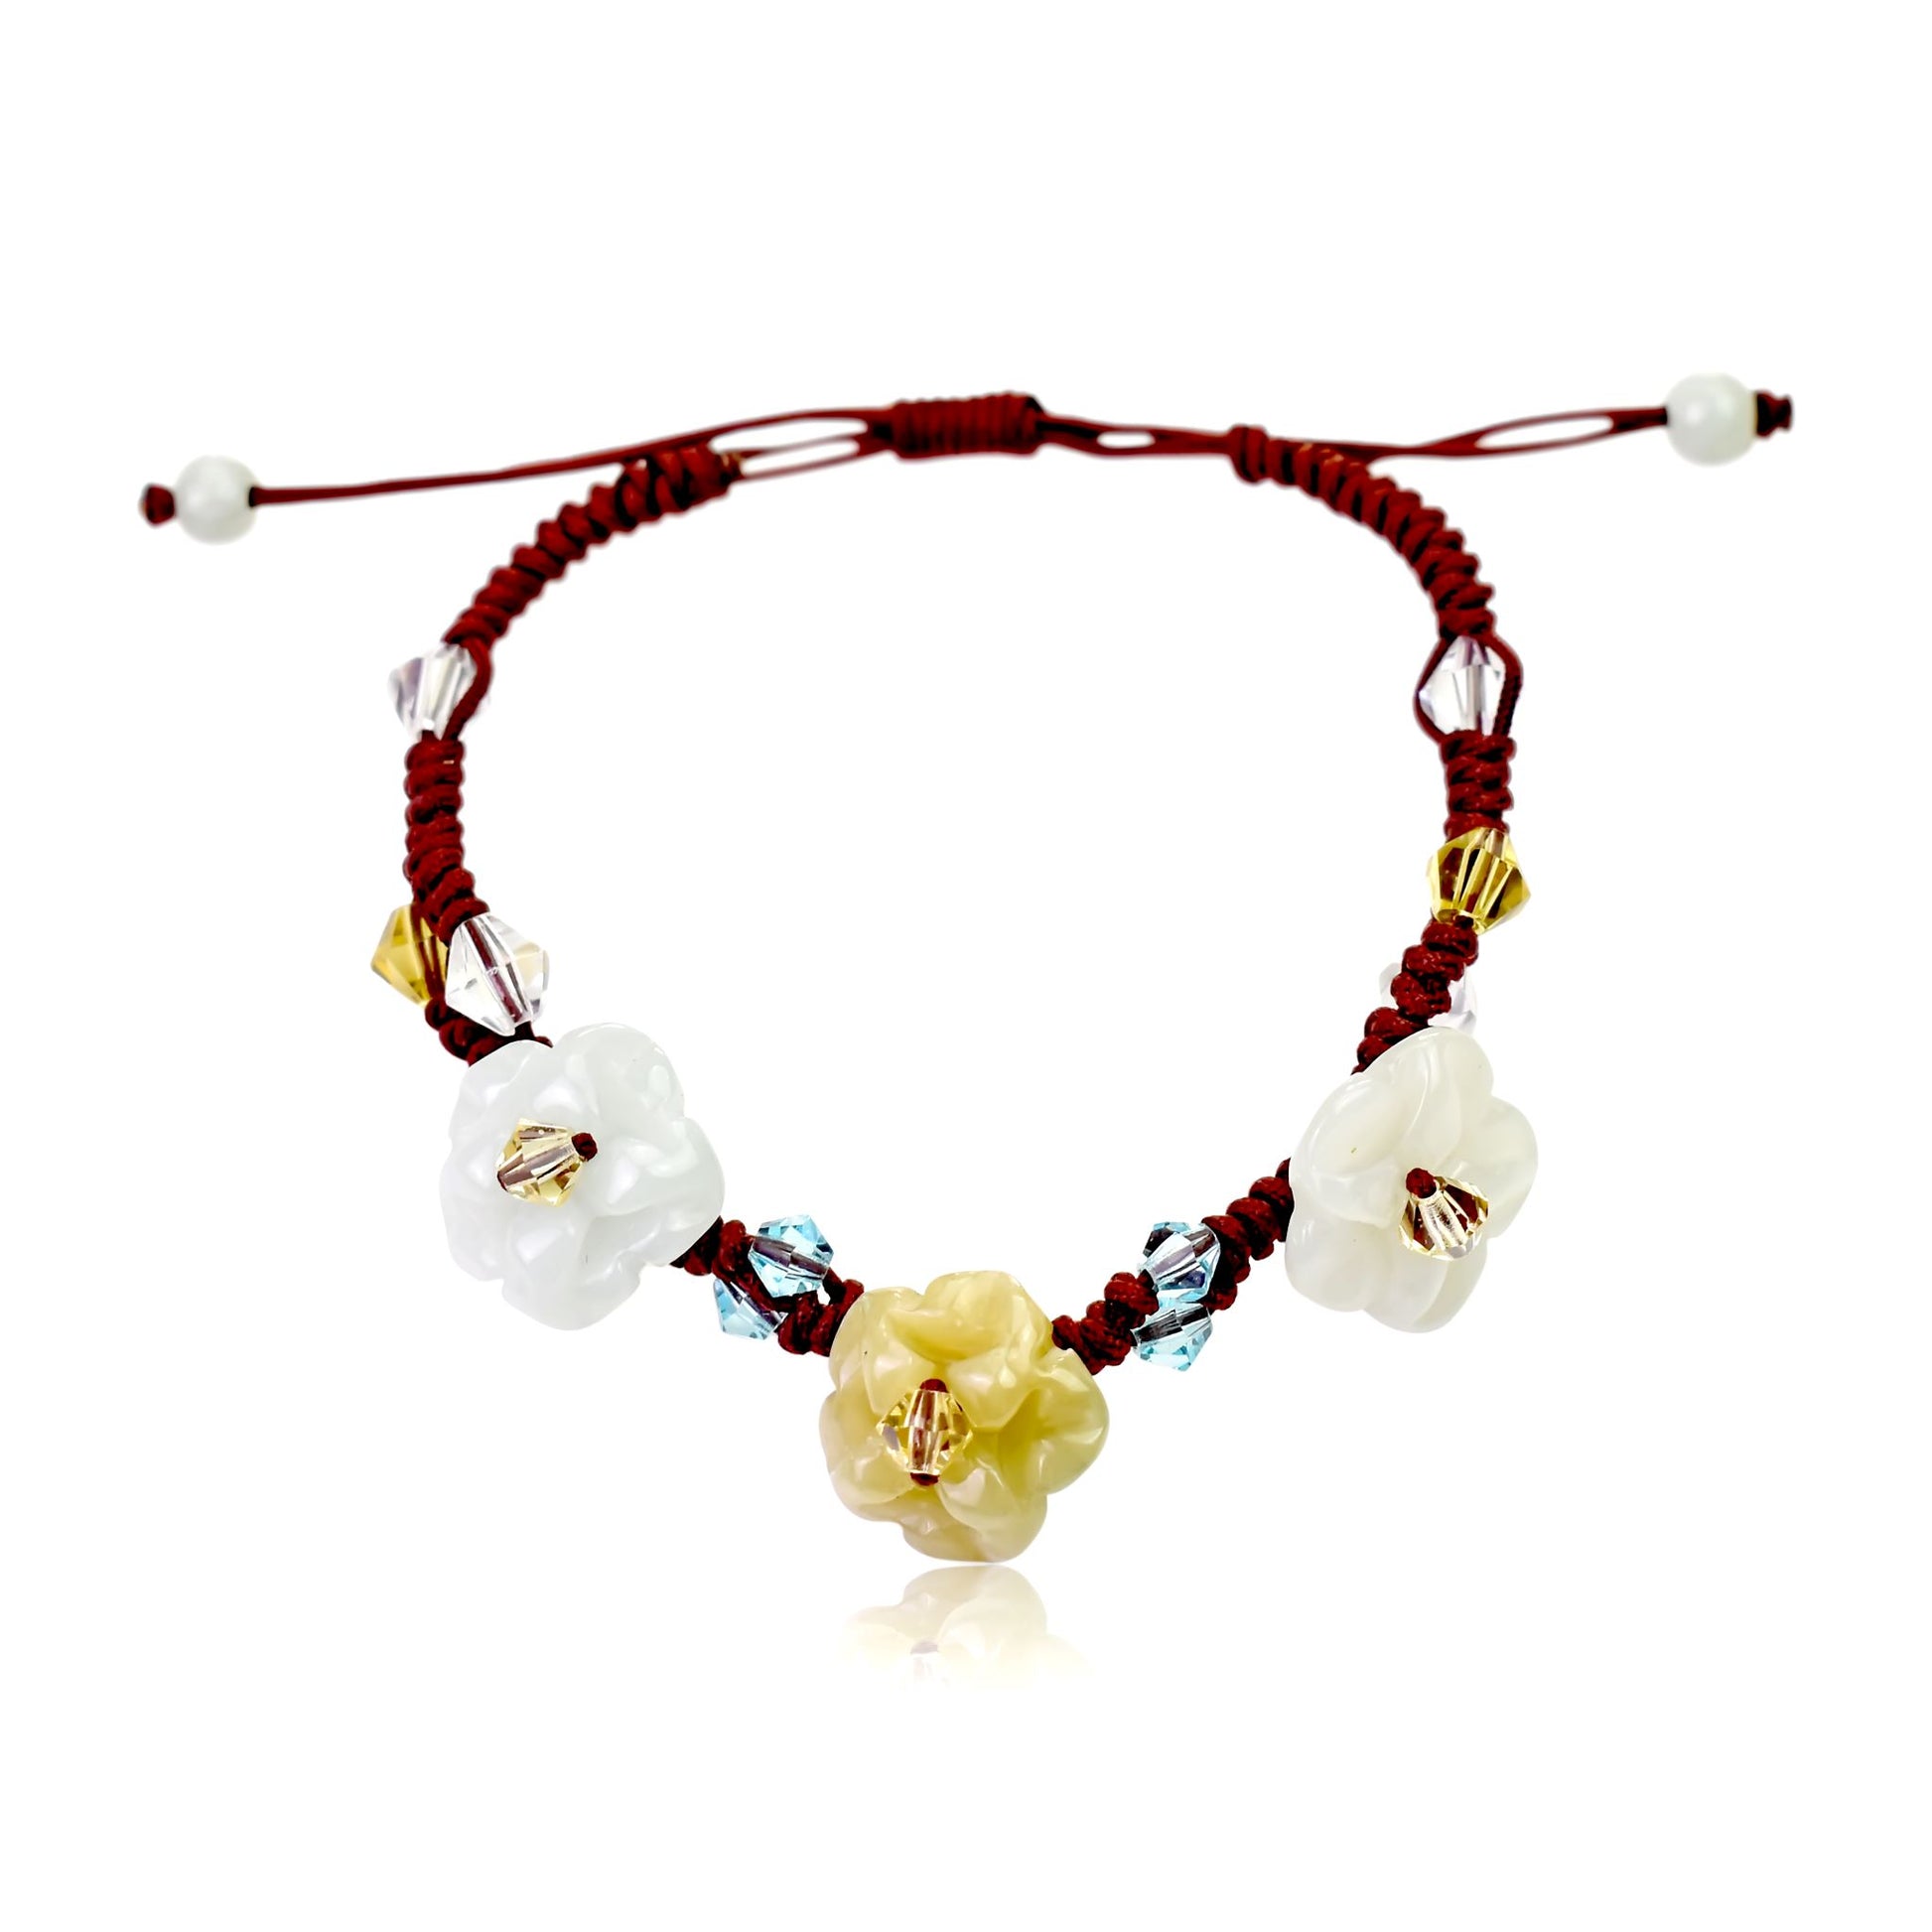 Wear Beauty with this Sparkling Crystal Scarlet Pimpernel Flower Bracelet made with Brown Cord